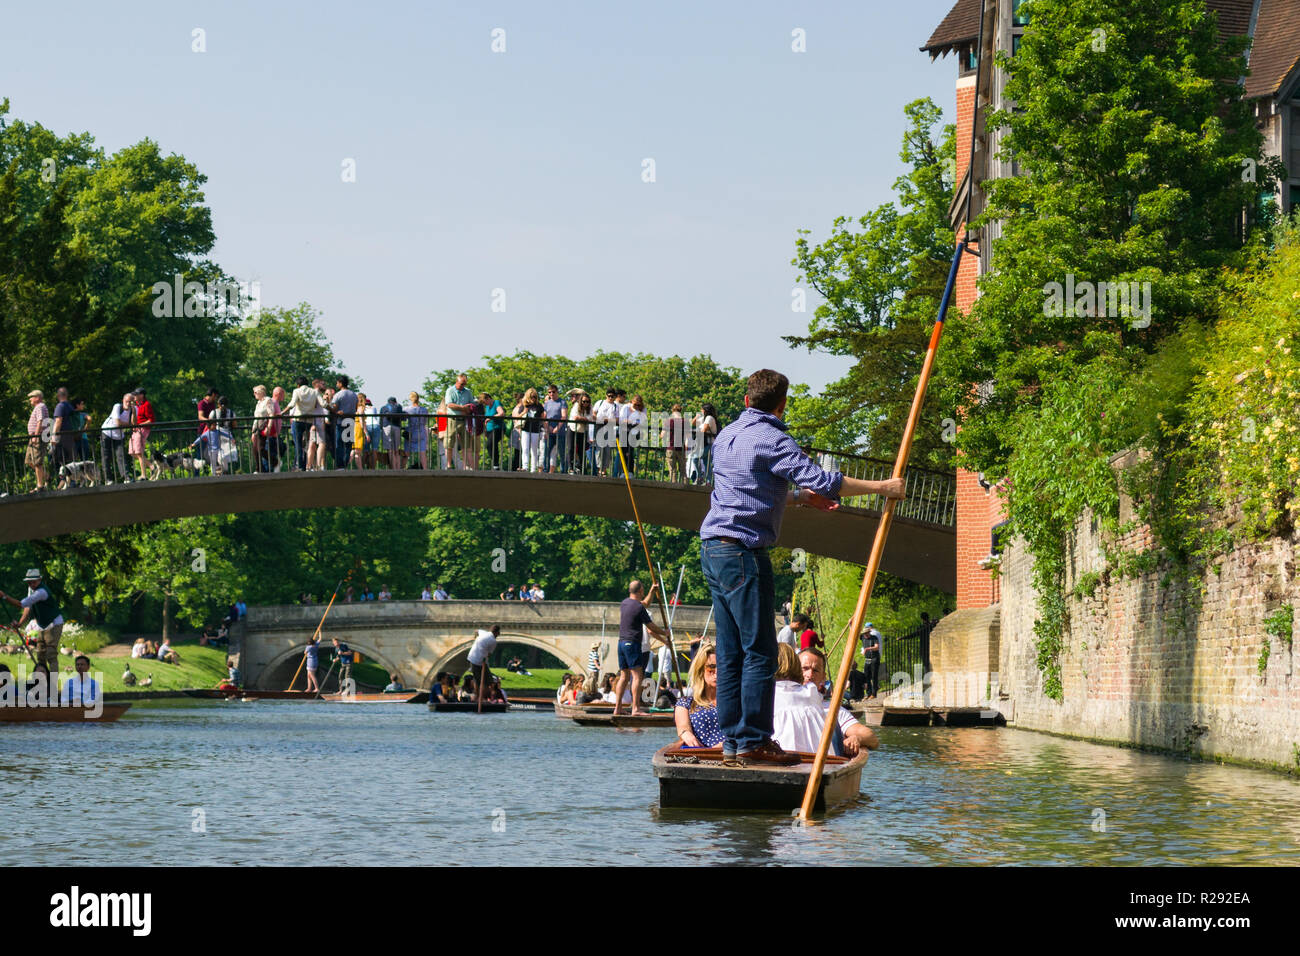 Several punt boats on a busy stretch of the river Cam with tourists standing on Garret Hostel Bridge, Cambridge, UK Stock Photo